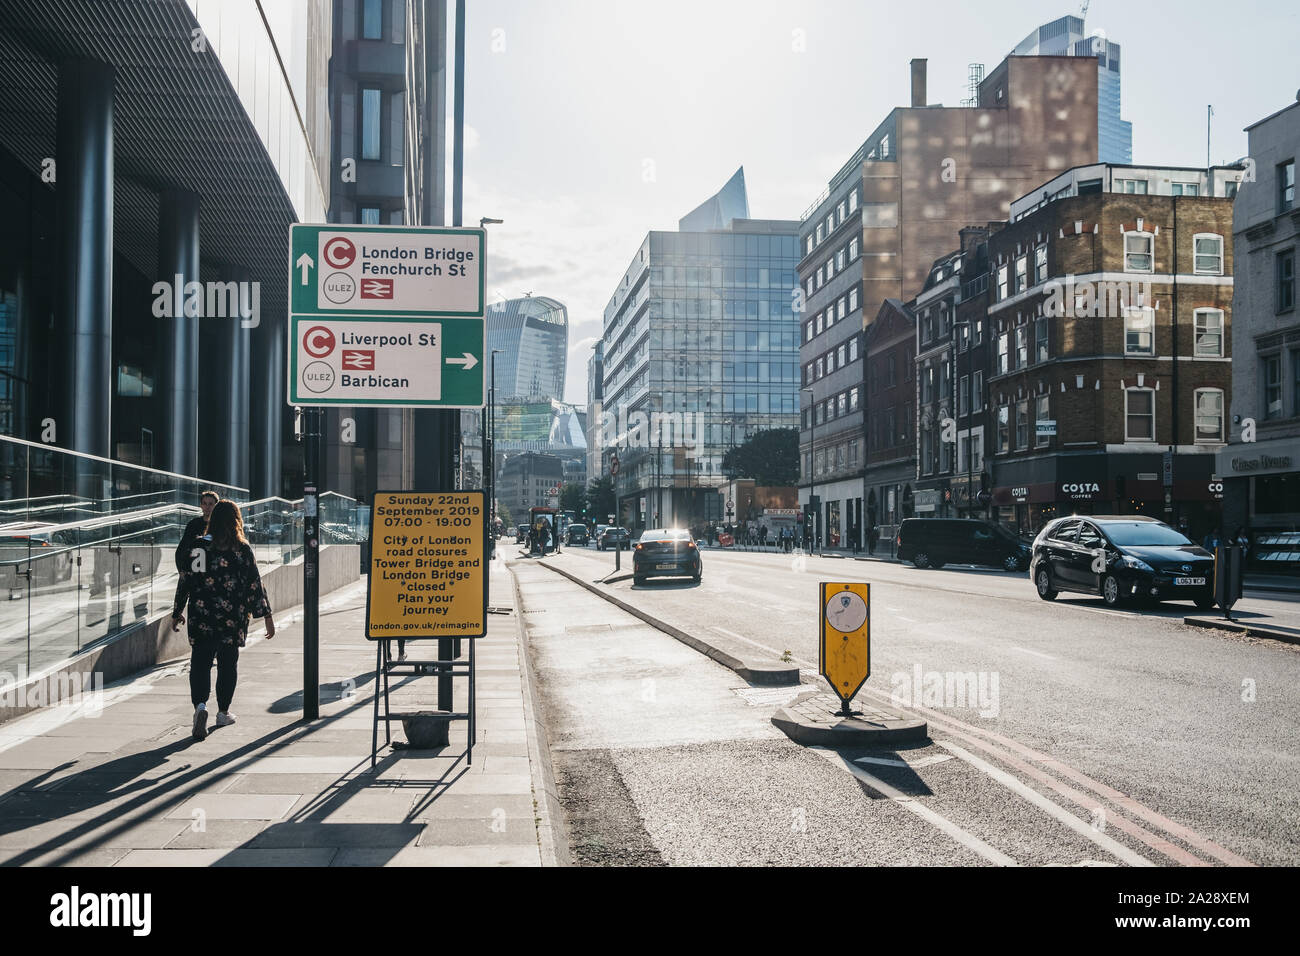 London, UK - September 7,2019:People walking by Ultra Low Emission Zone (ULEZ) and Congestion Charge signs on a street in London. ULEZ was introduced Stock Photo